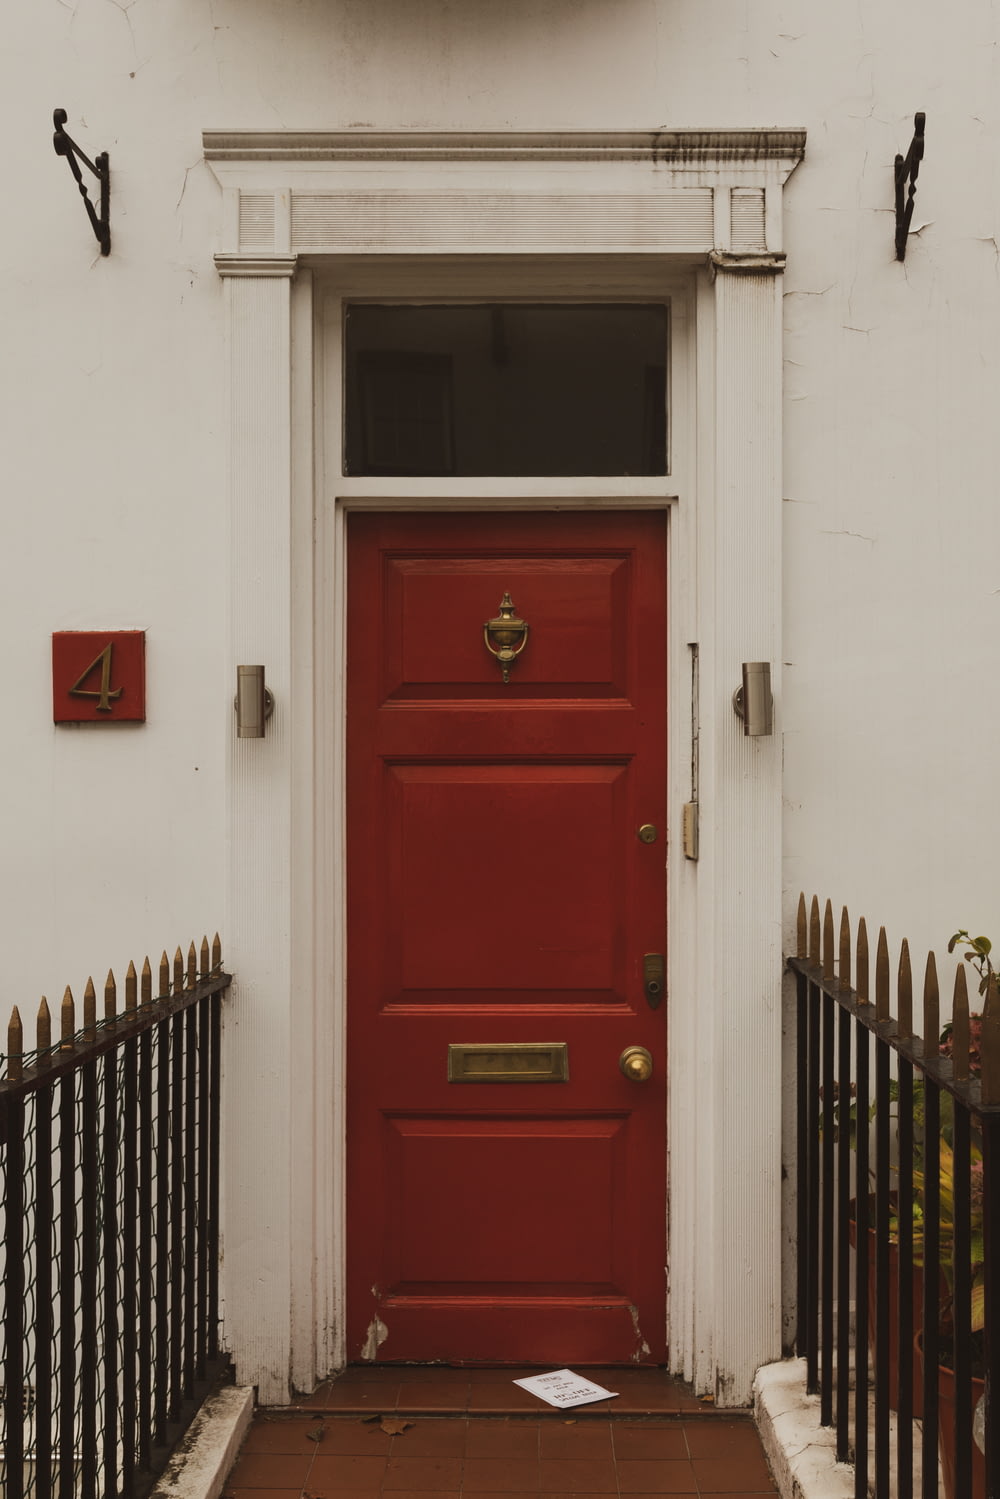 a red door with a clock above it